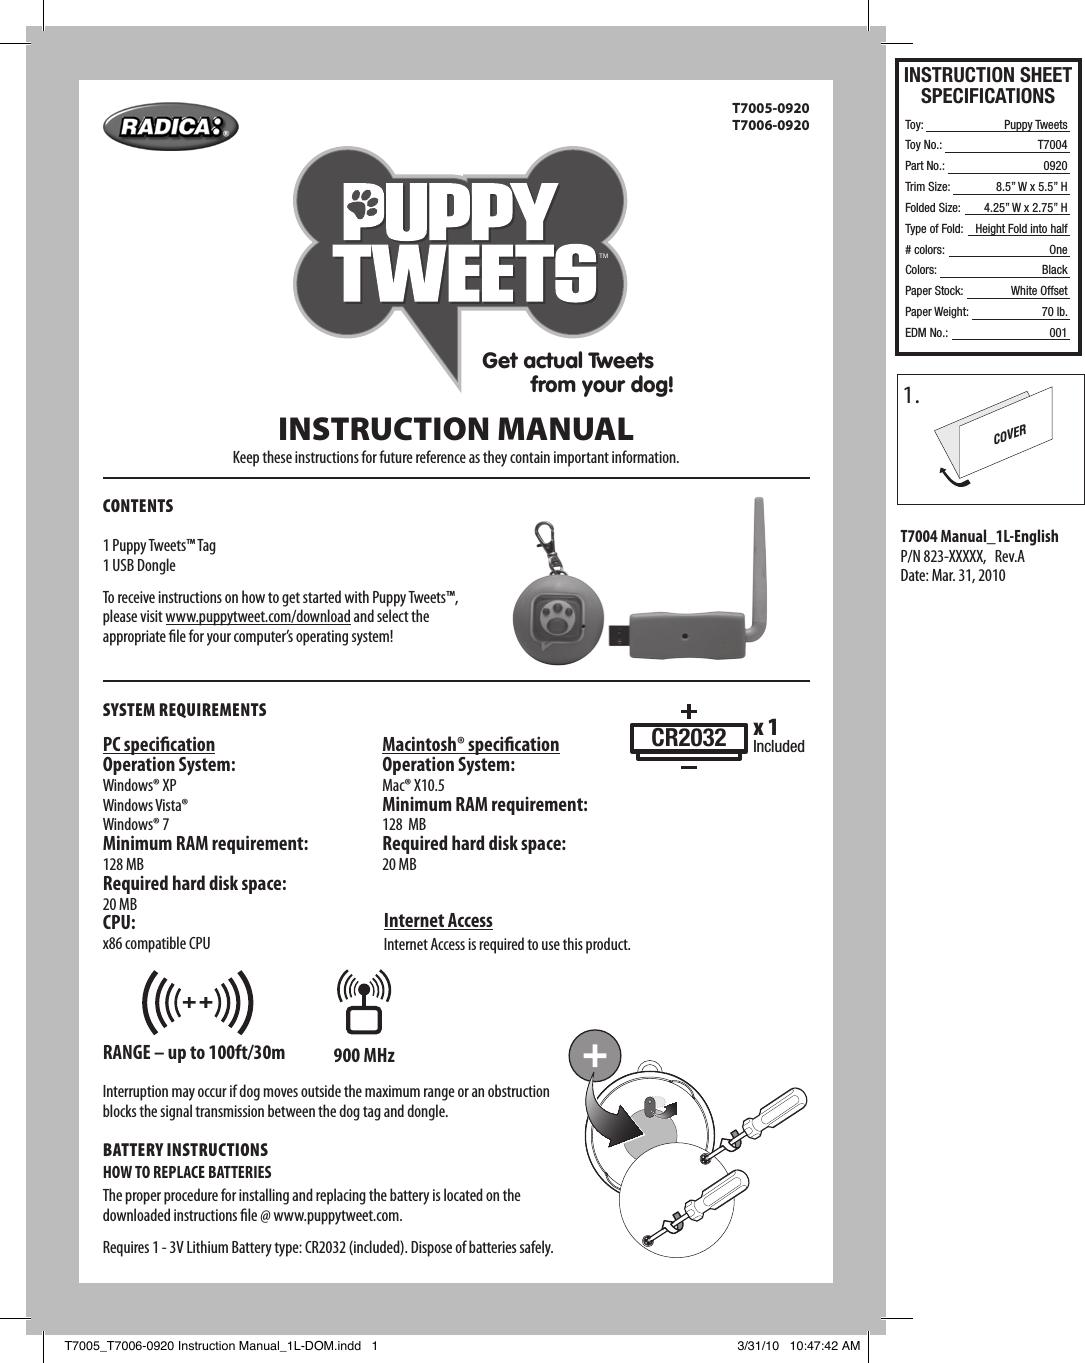 INSTRUCTION SHEETSPECIFICATIONSToy: Toy No.: Part No.:Trim Size:Folded Size:Type of Fold:# colors:Colors:Paper Stock:Paper Weight:EDM No.:Puppy TweetsT700409208.5” W x 5.5” H4.25” W x 2.75” HHeight Fold into halfOneBlackWhite Offset70 lb.001CONTENTST7005-0920  T7006-09201 Puppy Tweets™ Tag1 USB DongleTo receive instructions on how to get started with Puppy Tweets™, please visit www.puppytweet.com/download and select the appropriate le for your computer’s operating system!INSTRUCTION MANUALKeep these instructions for future reference as they contain important information.SySTEm REquiREmENTSPC specicationOperation System:Windows® XPWindows Vista®Windows® 7Minimum RAM requirement:128 MBRequired hard disk space:20 MBCPU:x86 compatible CPUInternet AccessInternet Access is required to use this product.Interruption may occur if dog moves outside the maximum range or an obstruction blocks the signal transmission between the dog tag and dongle. BATTERy iNSTRuCTiONSHOW TO REPLACE BATTERIESThe proper procedure for installing and replacing the battery is located on the downloaded instructions le @ www.puppytweet.com.Requires 1 - 3V Lithium Battery type: CR2032 (included). Dispose of batteries safely.RANGE – up to 100ft/30m 900 MHzMacintosh® specicationOperation System:Mac® X10.5Minimum RAM requirement:128  MBRequired hard disk space:20 MBCR2032 x 1IncludedGet actual Tweets         from your dog!TMRANGE – 100ft/30m915 MHzT7004 Manual_1L-EnglishP/N 823-XXXXX,   Rev.ADate: Mar. 31, 20101.COVERT7005_T7006-0920 Instruction Manual_1L-DOM.indd   1 3/31/10   10:47:42 AM